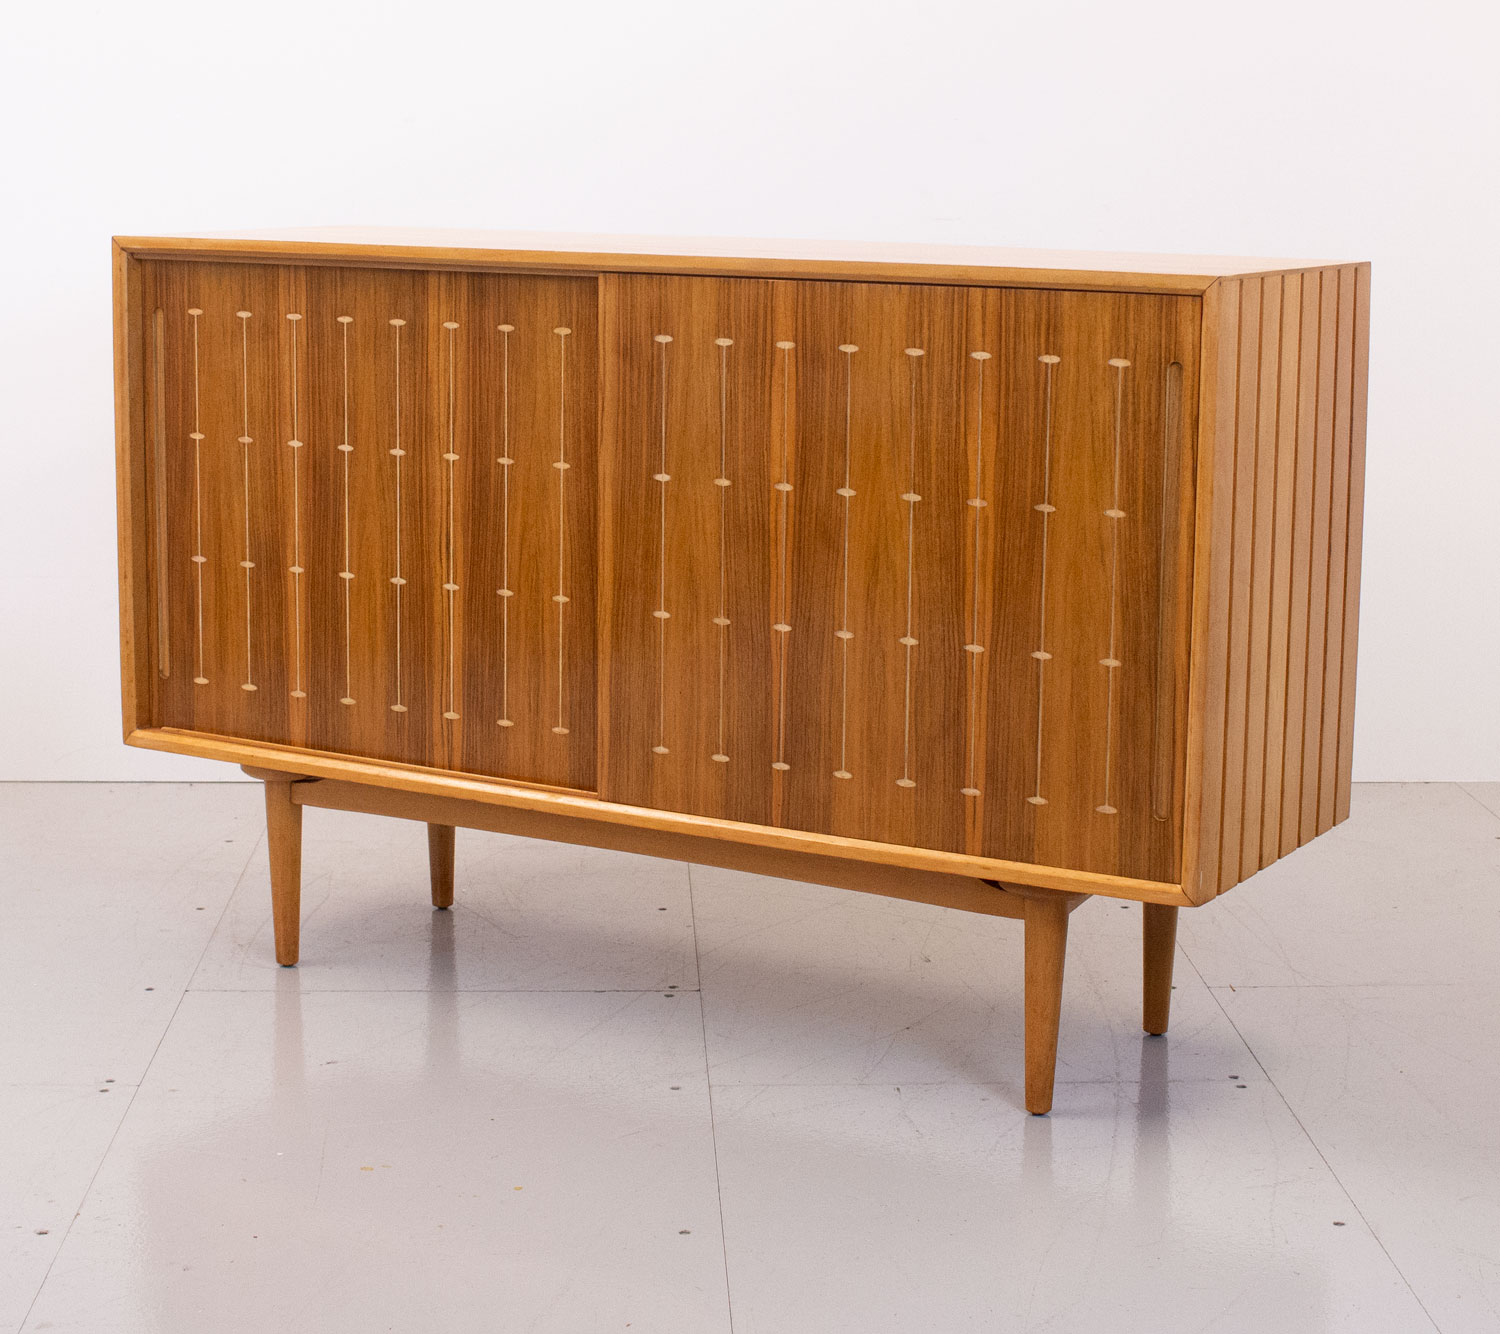 Walnut Sideboard with Routed Pattern by Heals, 1950s